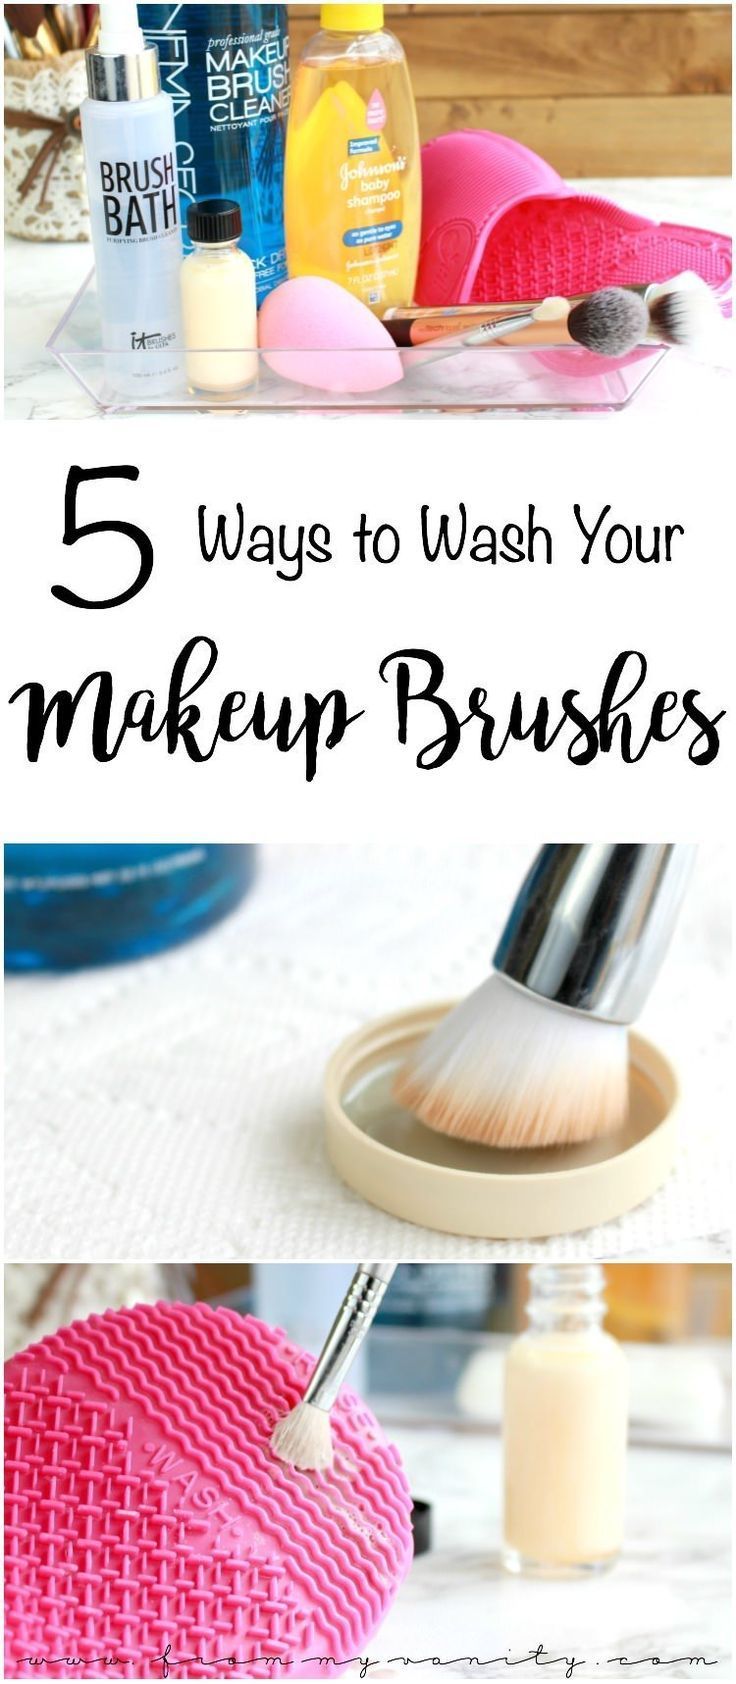 5 Ways to Wash Your Makeup Brushes - From My Vanity - 5 Ways to Wash Your Makeup Brushes - From My Vanity -   16 diy Makeup sponge ideas